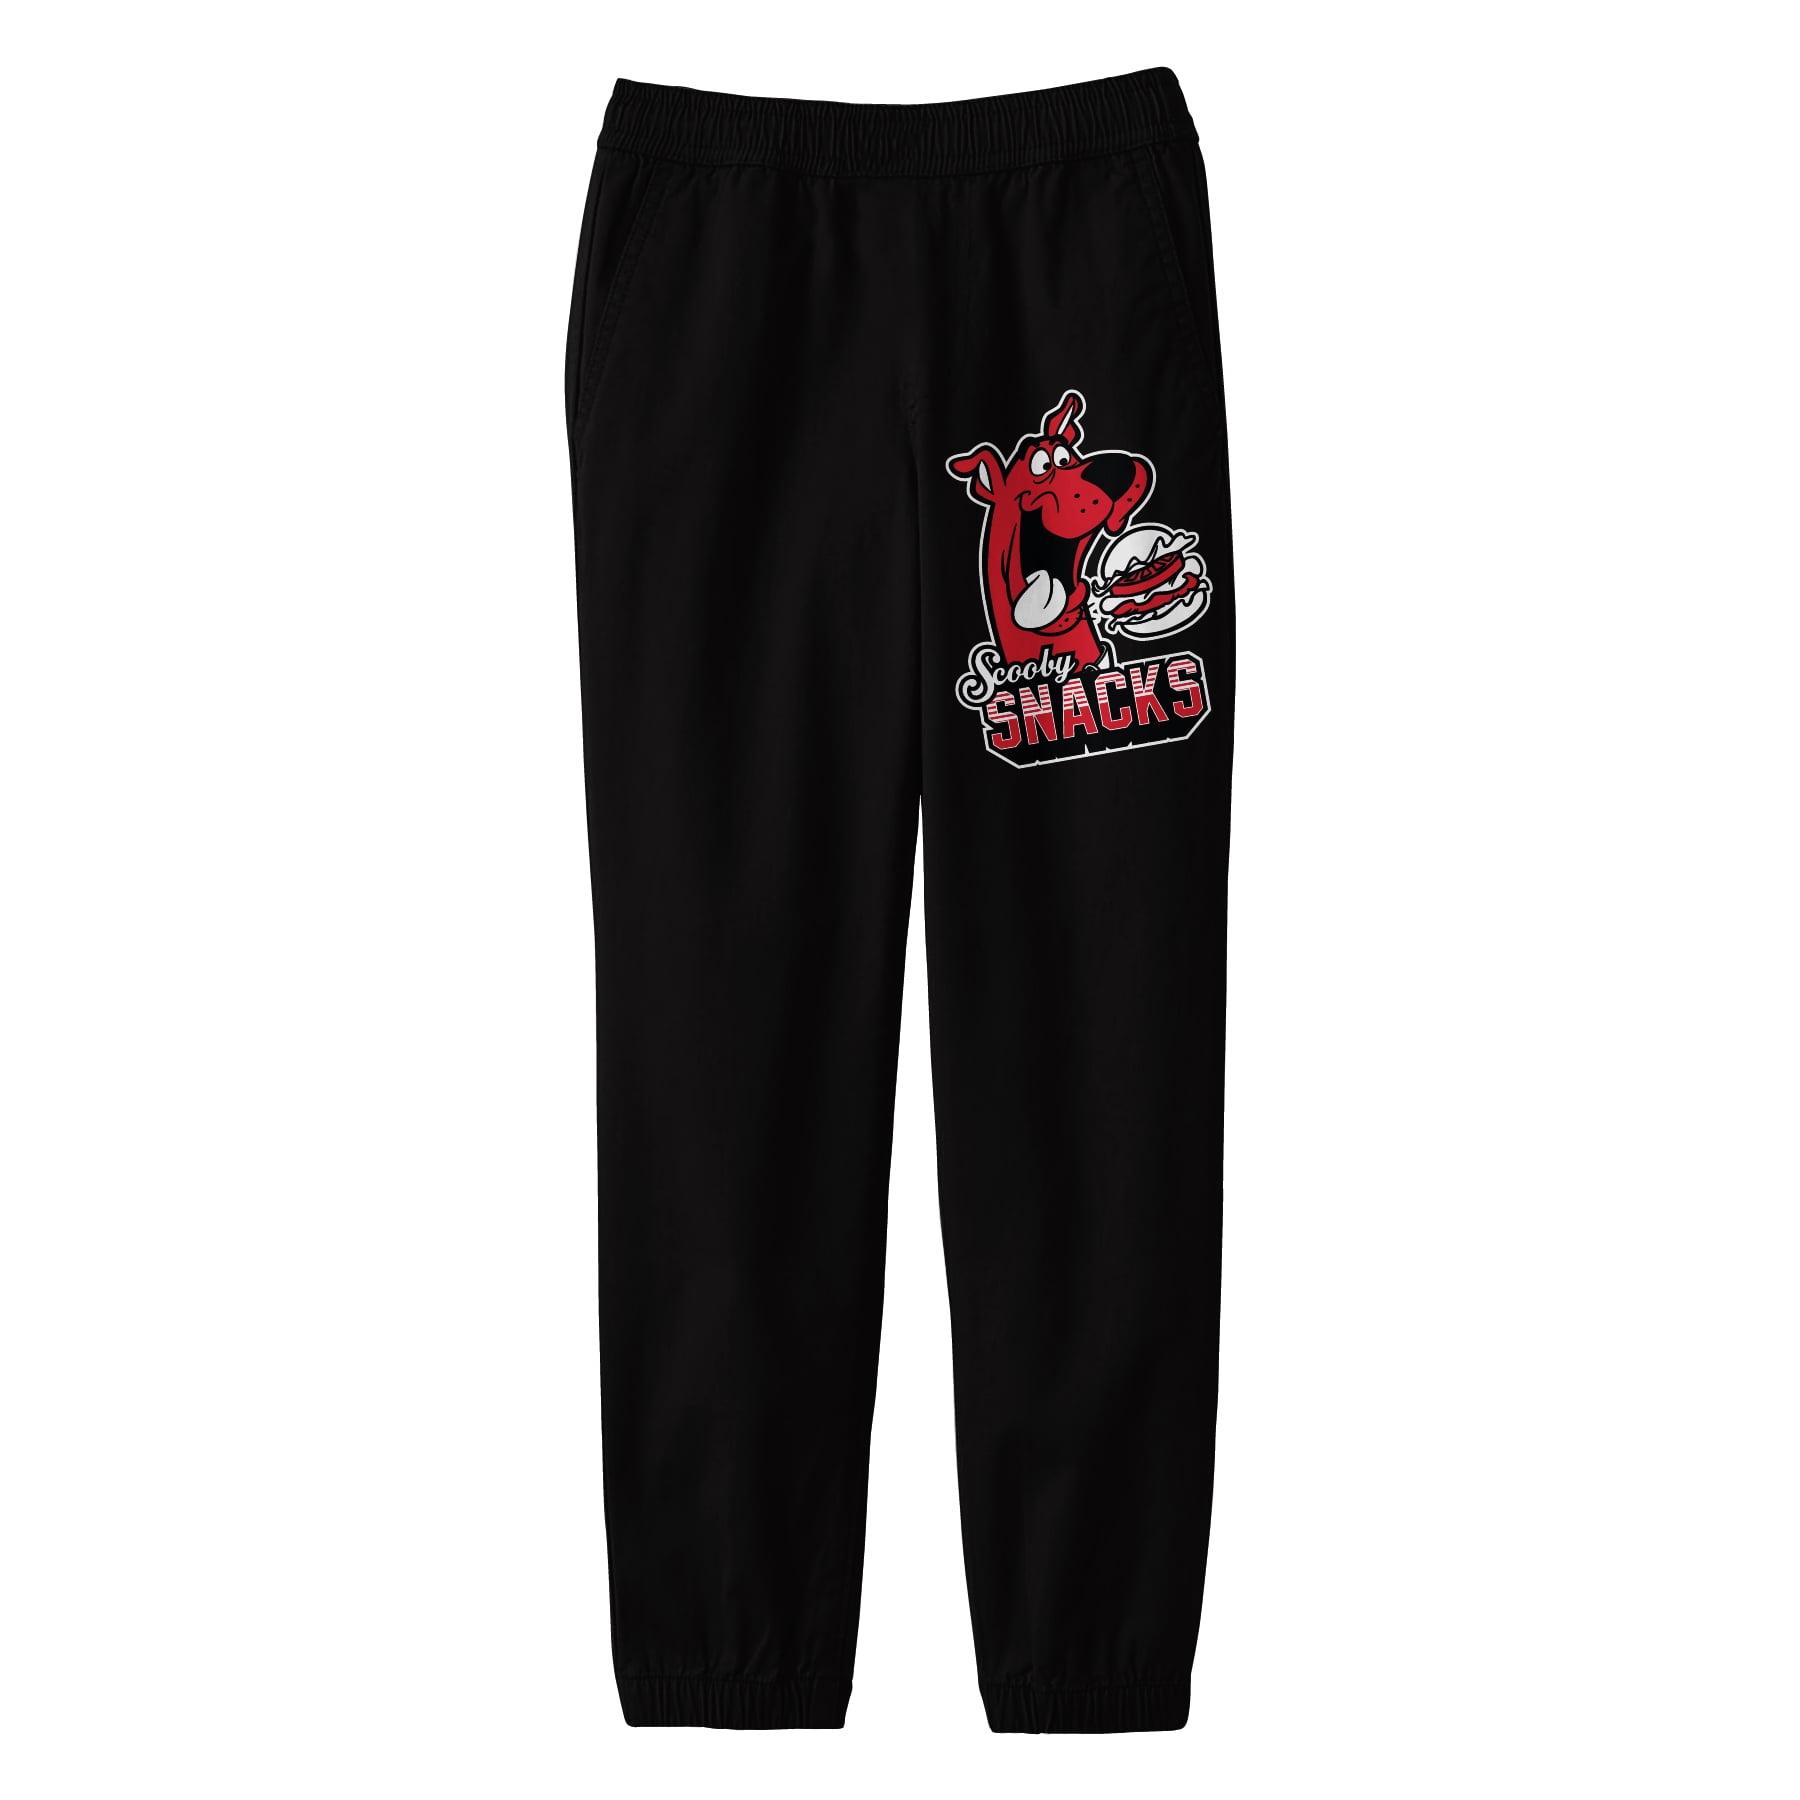 Scooby Doo Scooby Snack Youth Black Graphic Sweatpants-XL - Walmart.com